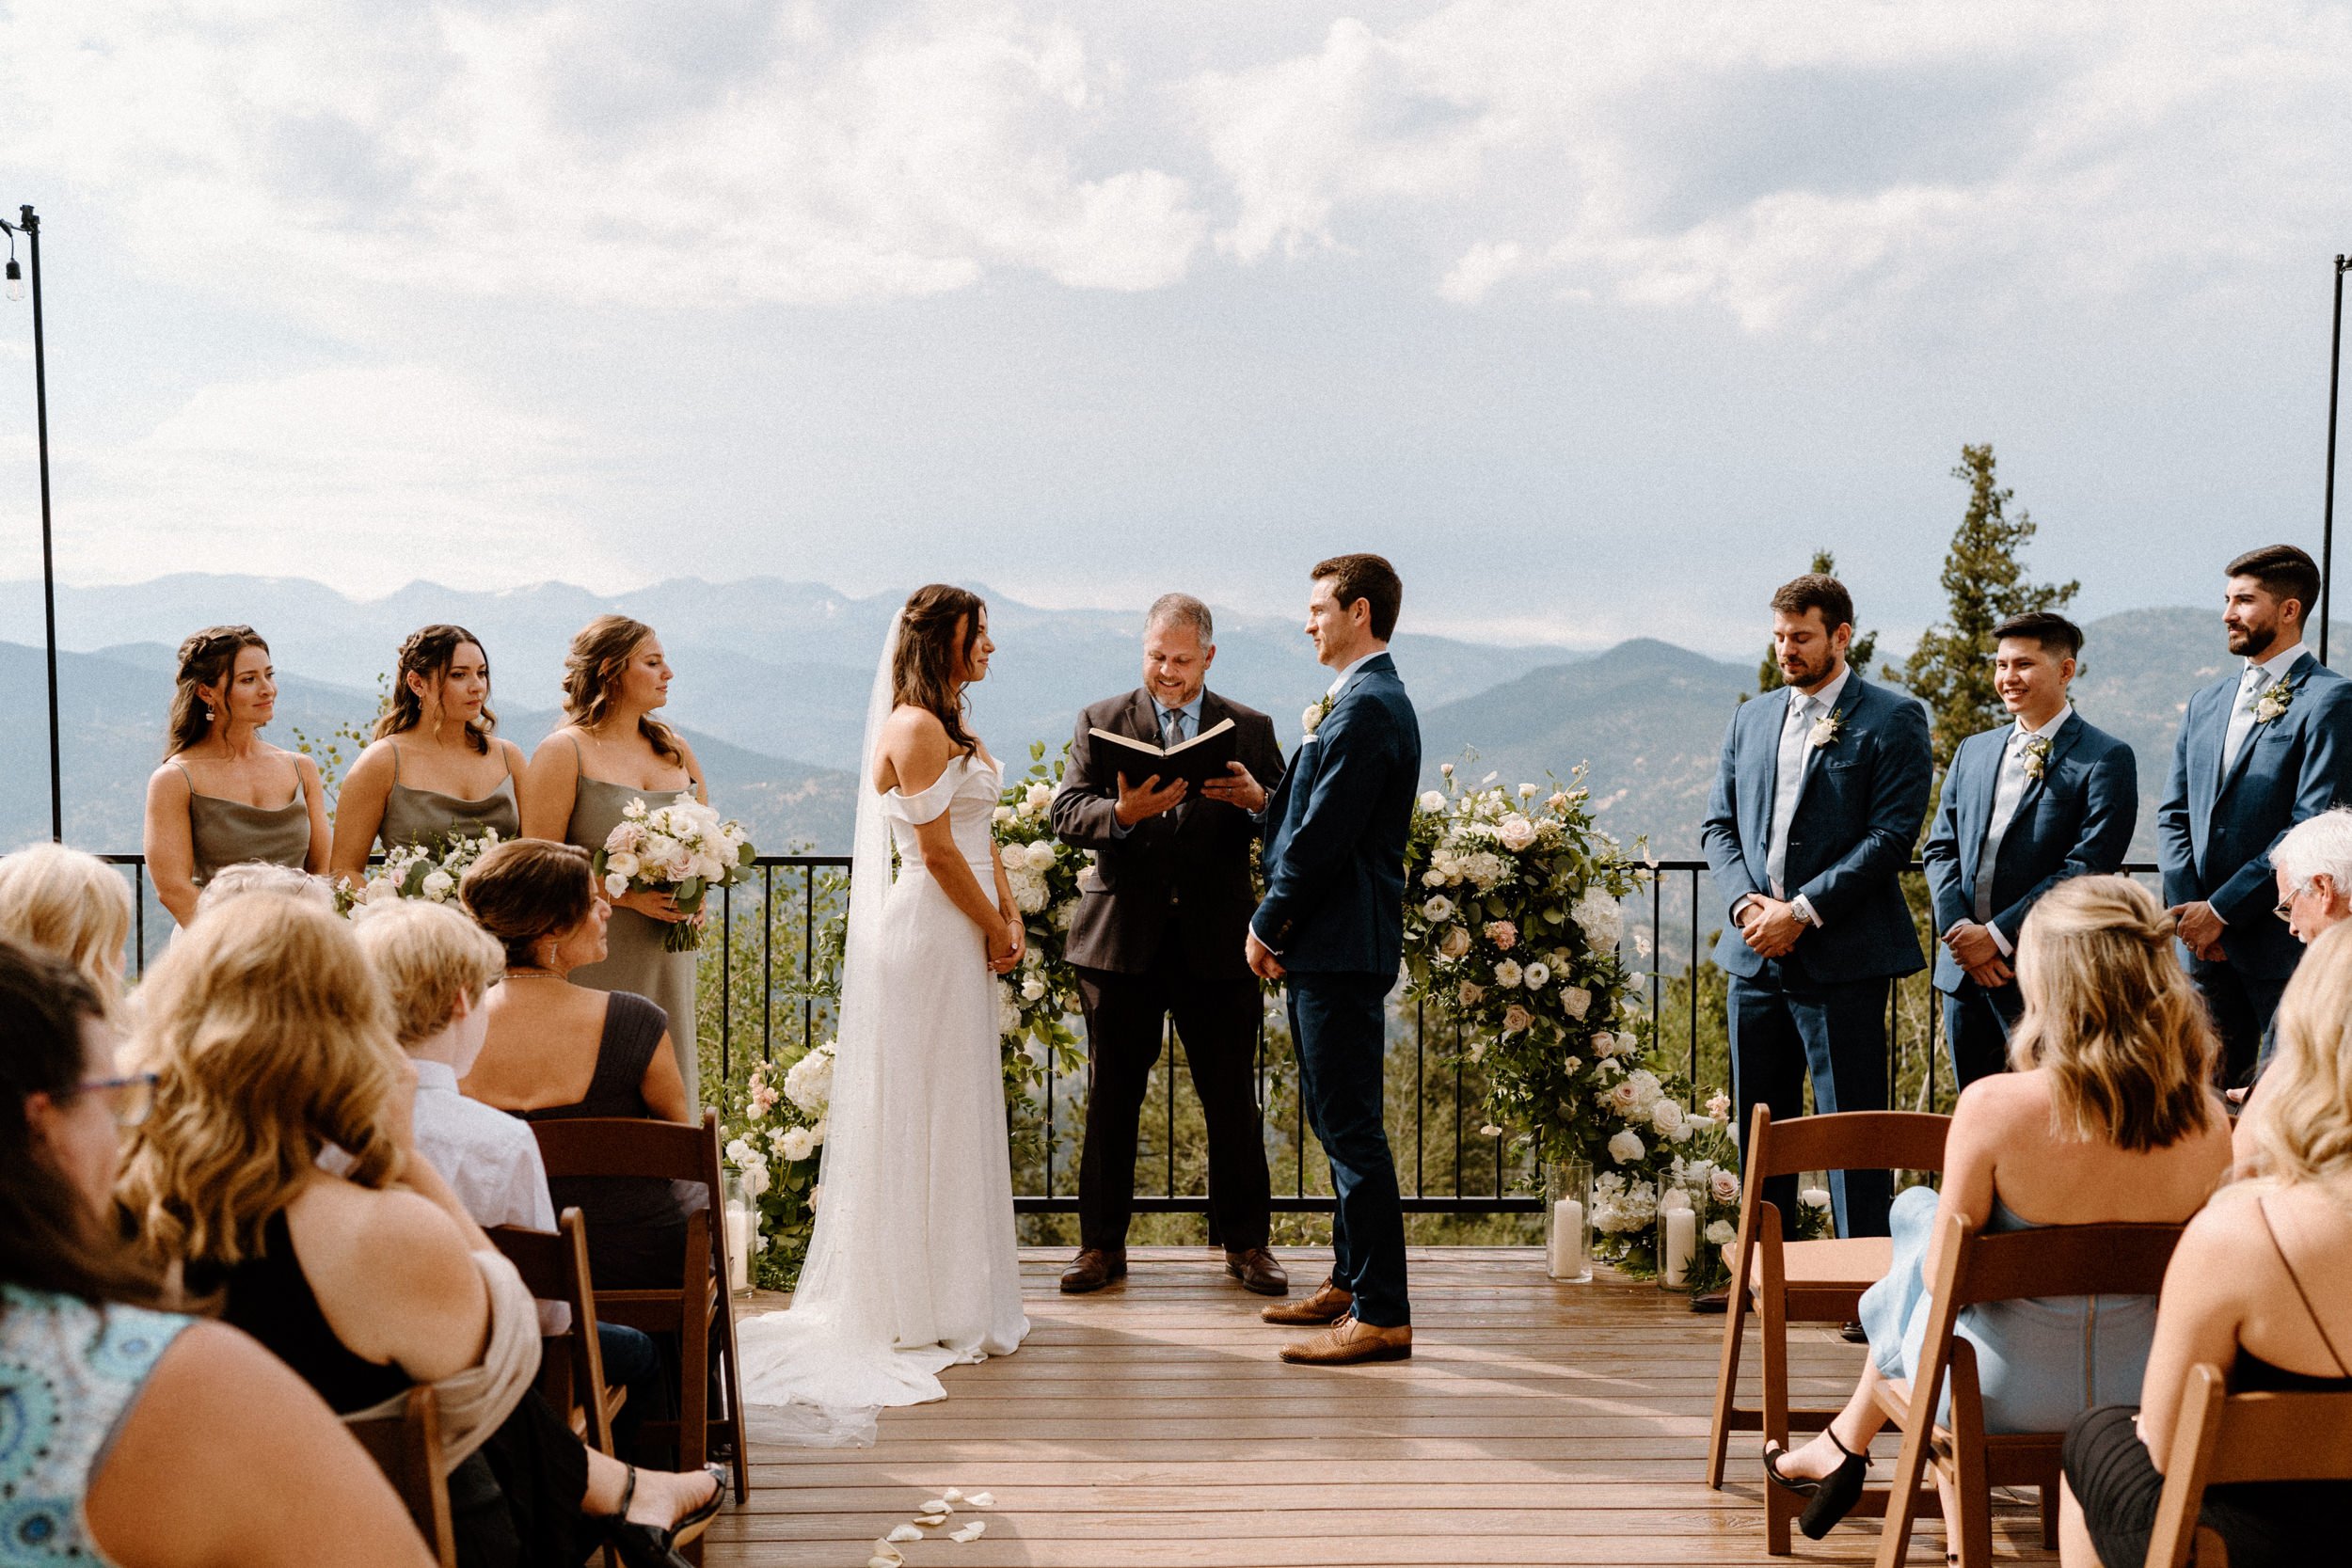 Bride and groom stand at the altar together at North Star Gatherings in Idaho Springs, CO